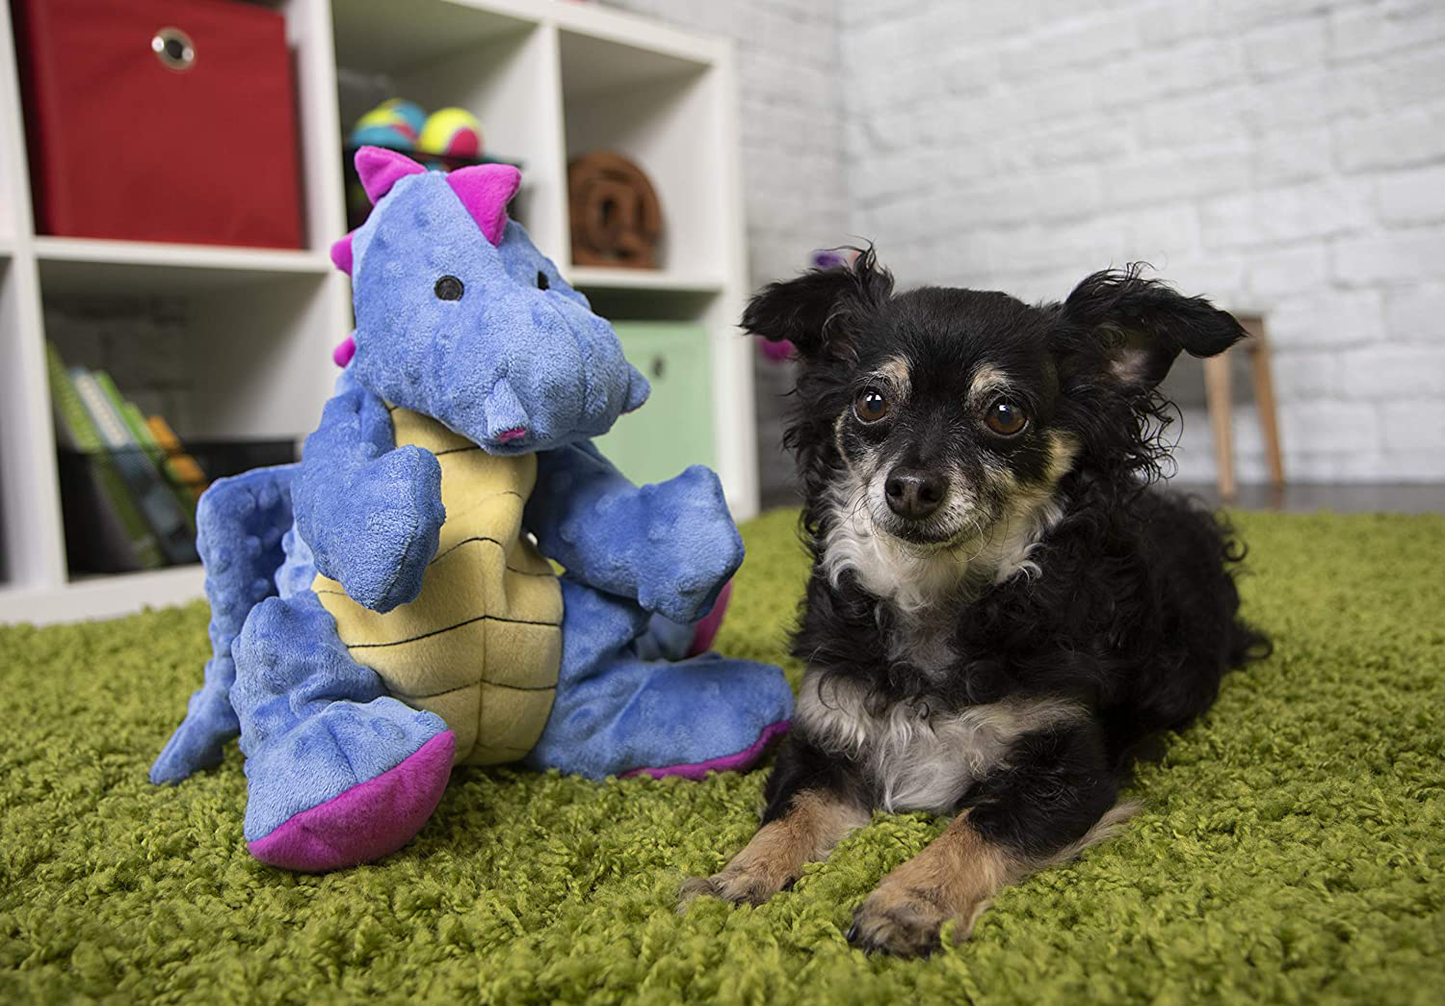 Godog, Dragons, Squeaker Dog Toy, Chew Resistant, Durable Plush, Soft, Tough, Reinforced Seams, Periwinkle, Extra Large